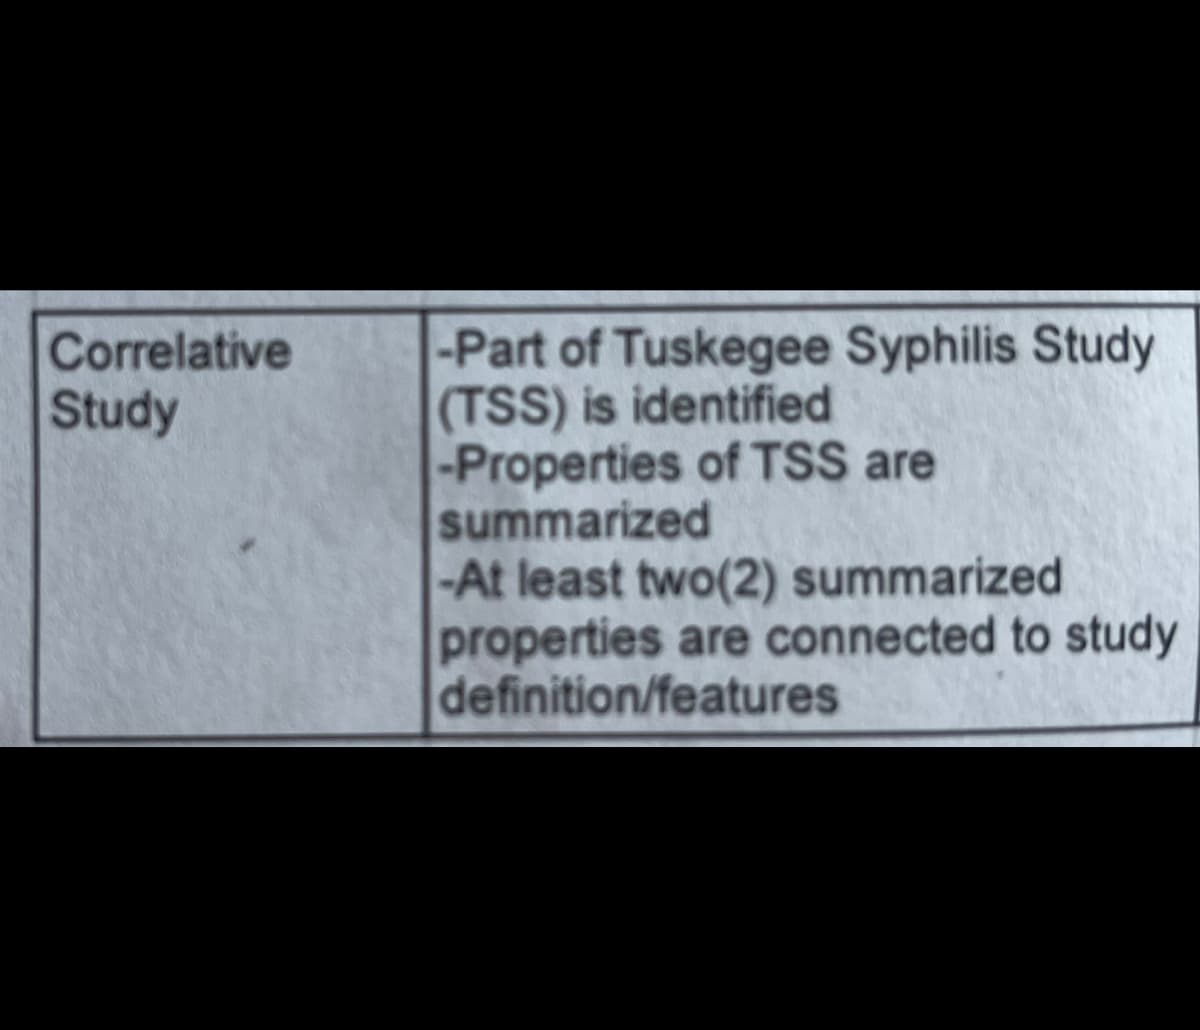 Correlative
Study
-Part of Tuskegee Syphilis Study
(TSS) is identified
-Properties of TSS are
summarized
-At least two(2) summarized
properties are connected to study
definition/features